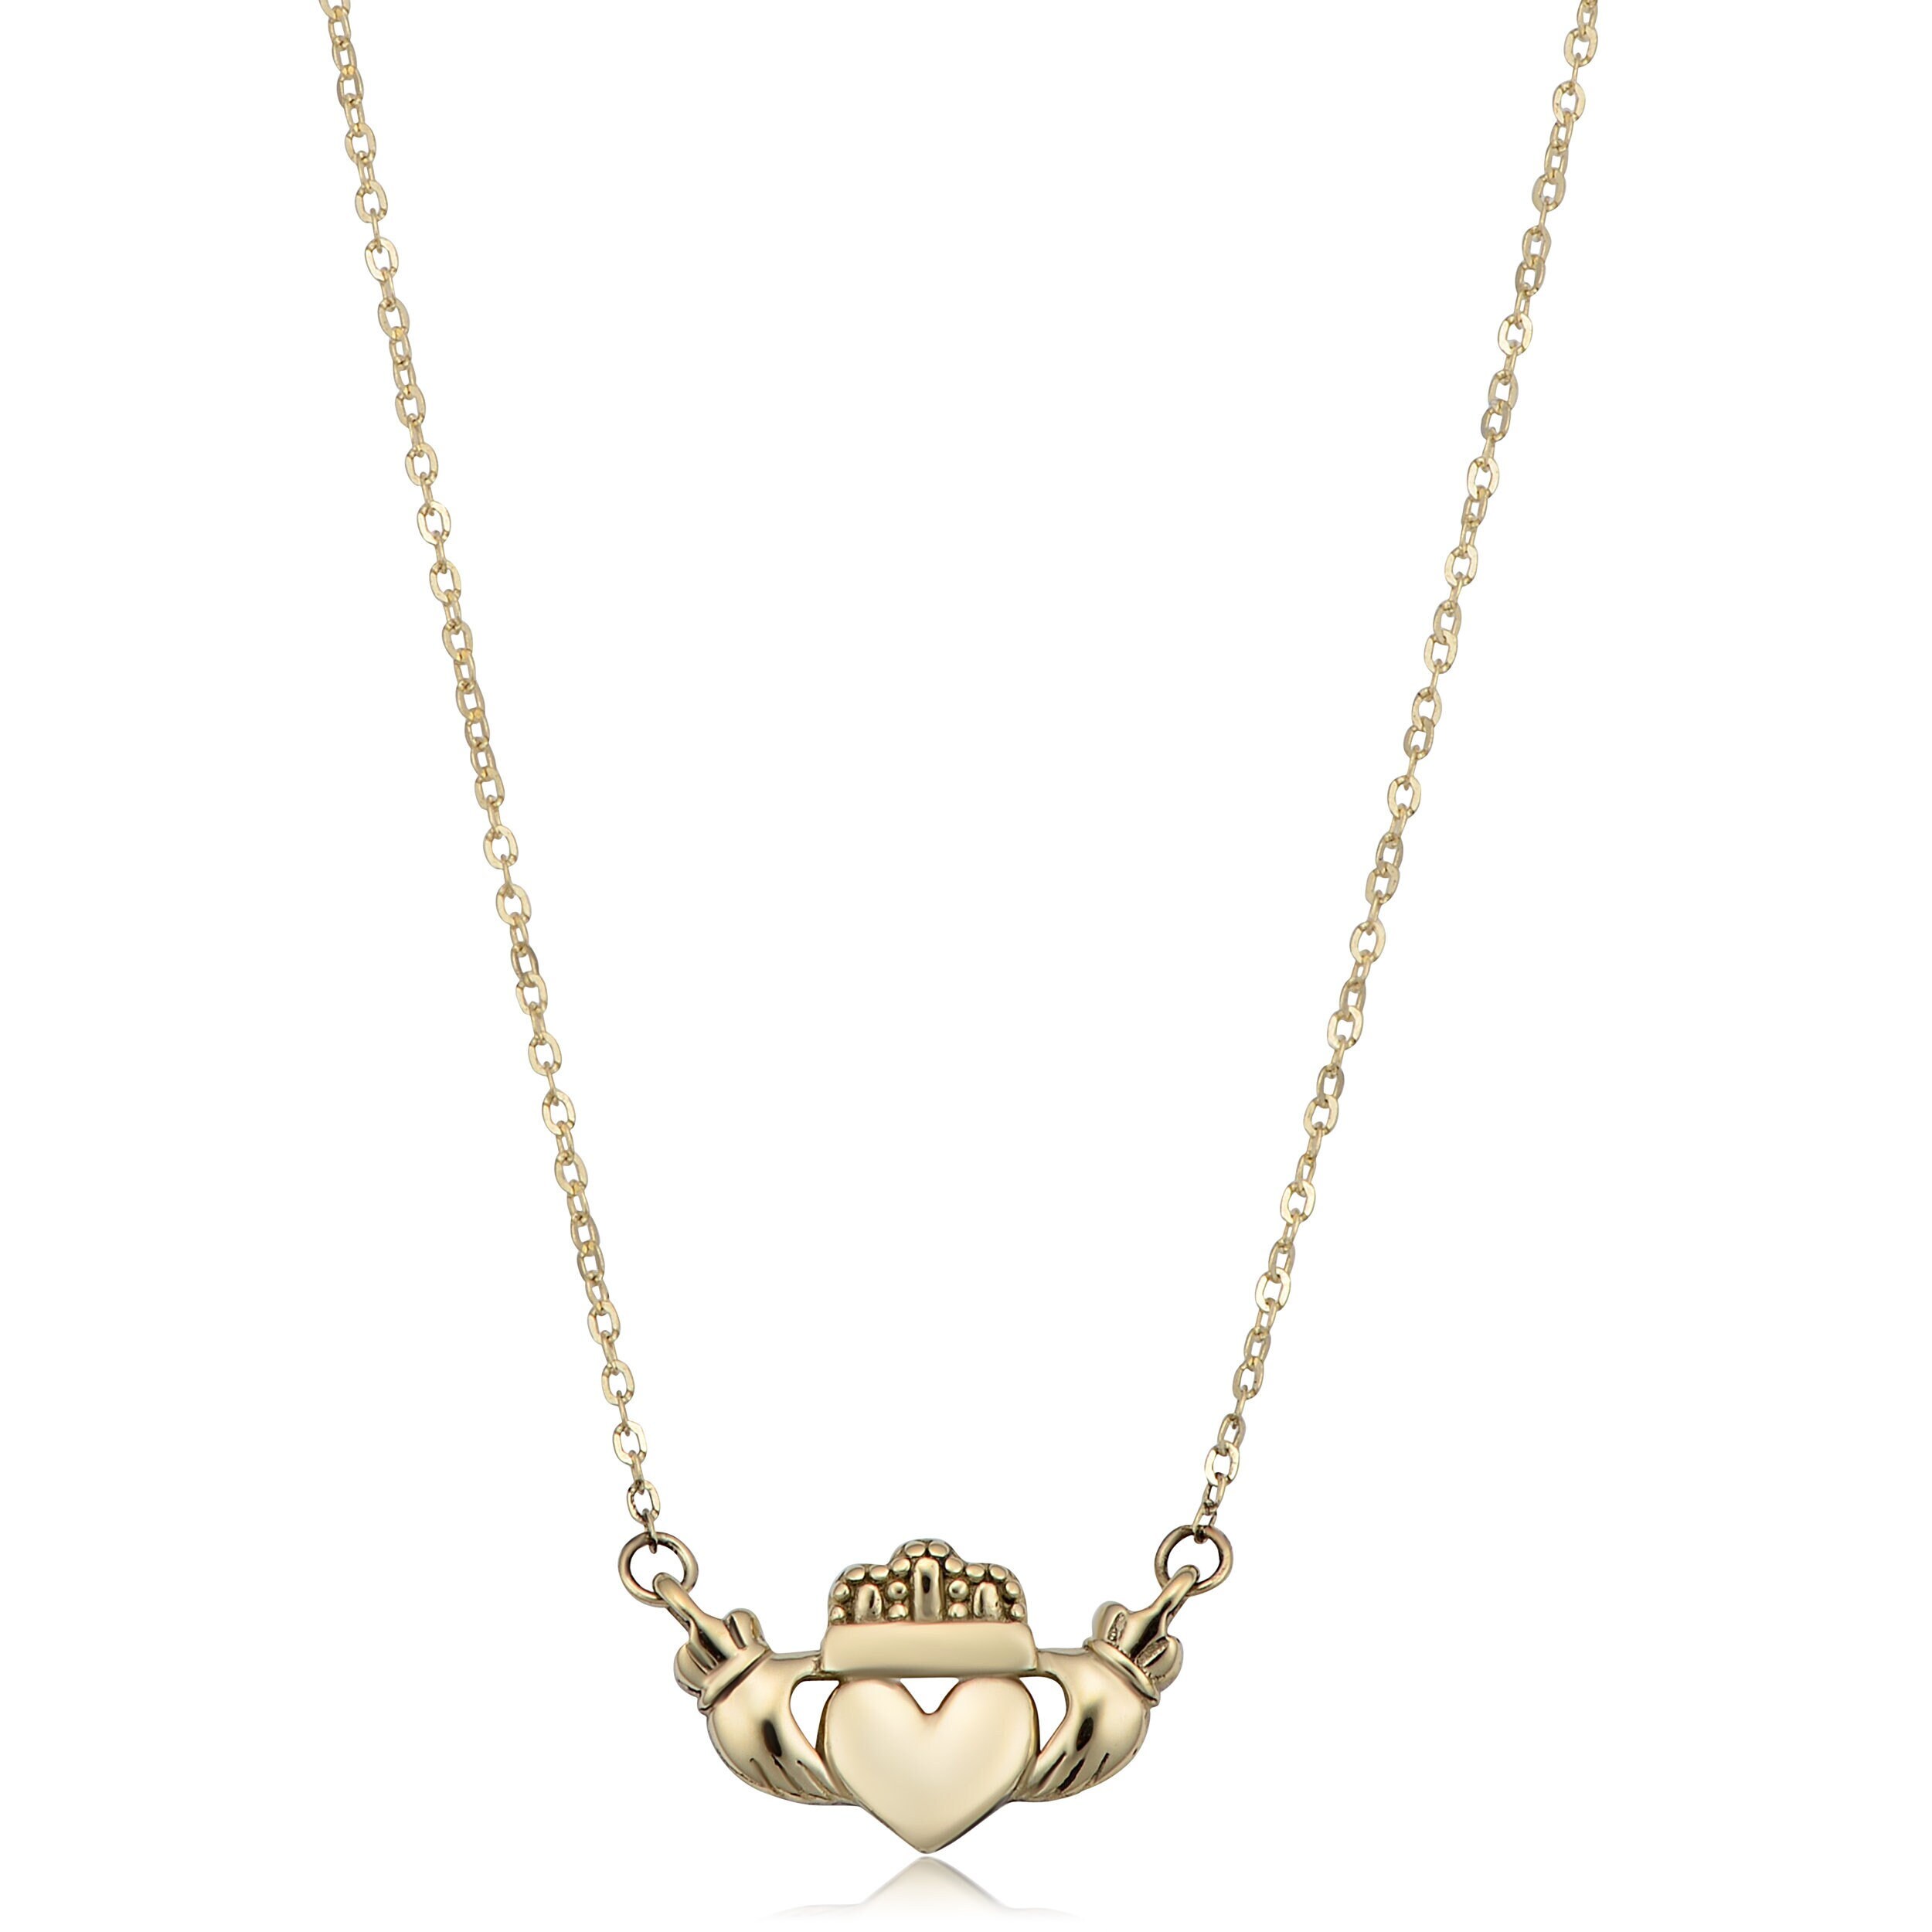 14k Yellow Gold Claddagh Necklace adjusts to 16 or 18 - Etsy